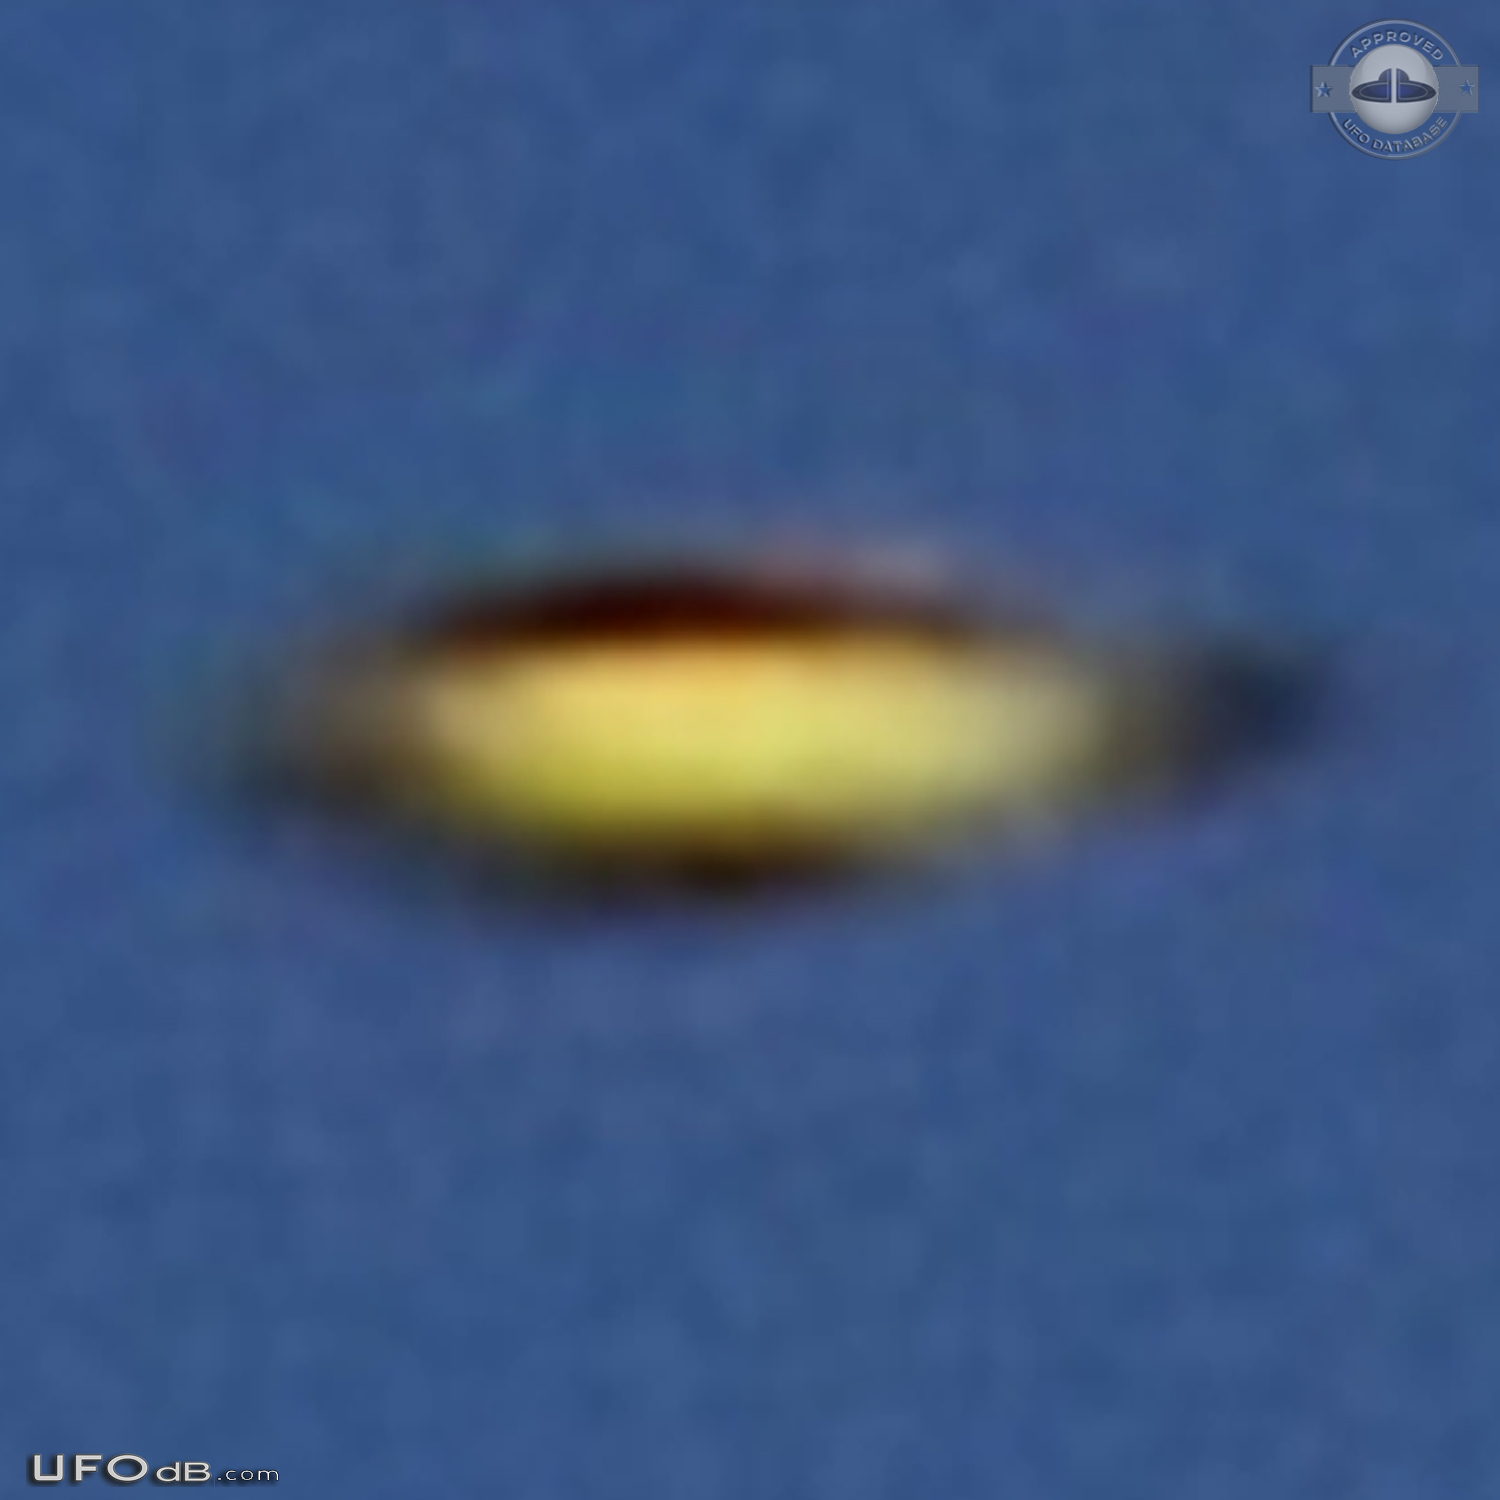 UFO Expert Captures Close Encounter With Disk-Shaped UFO 2015 UFO Picture #684-4